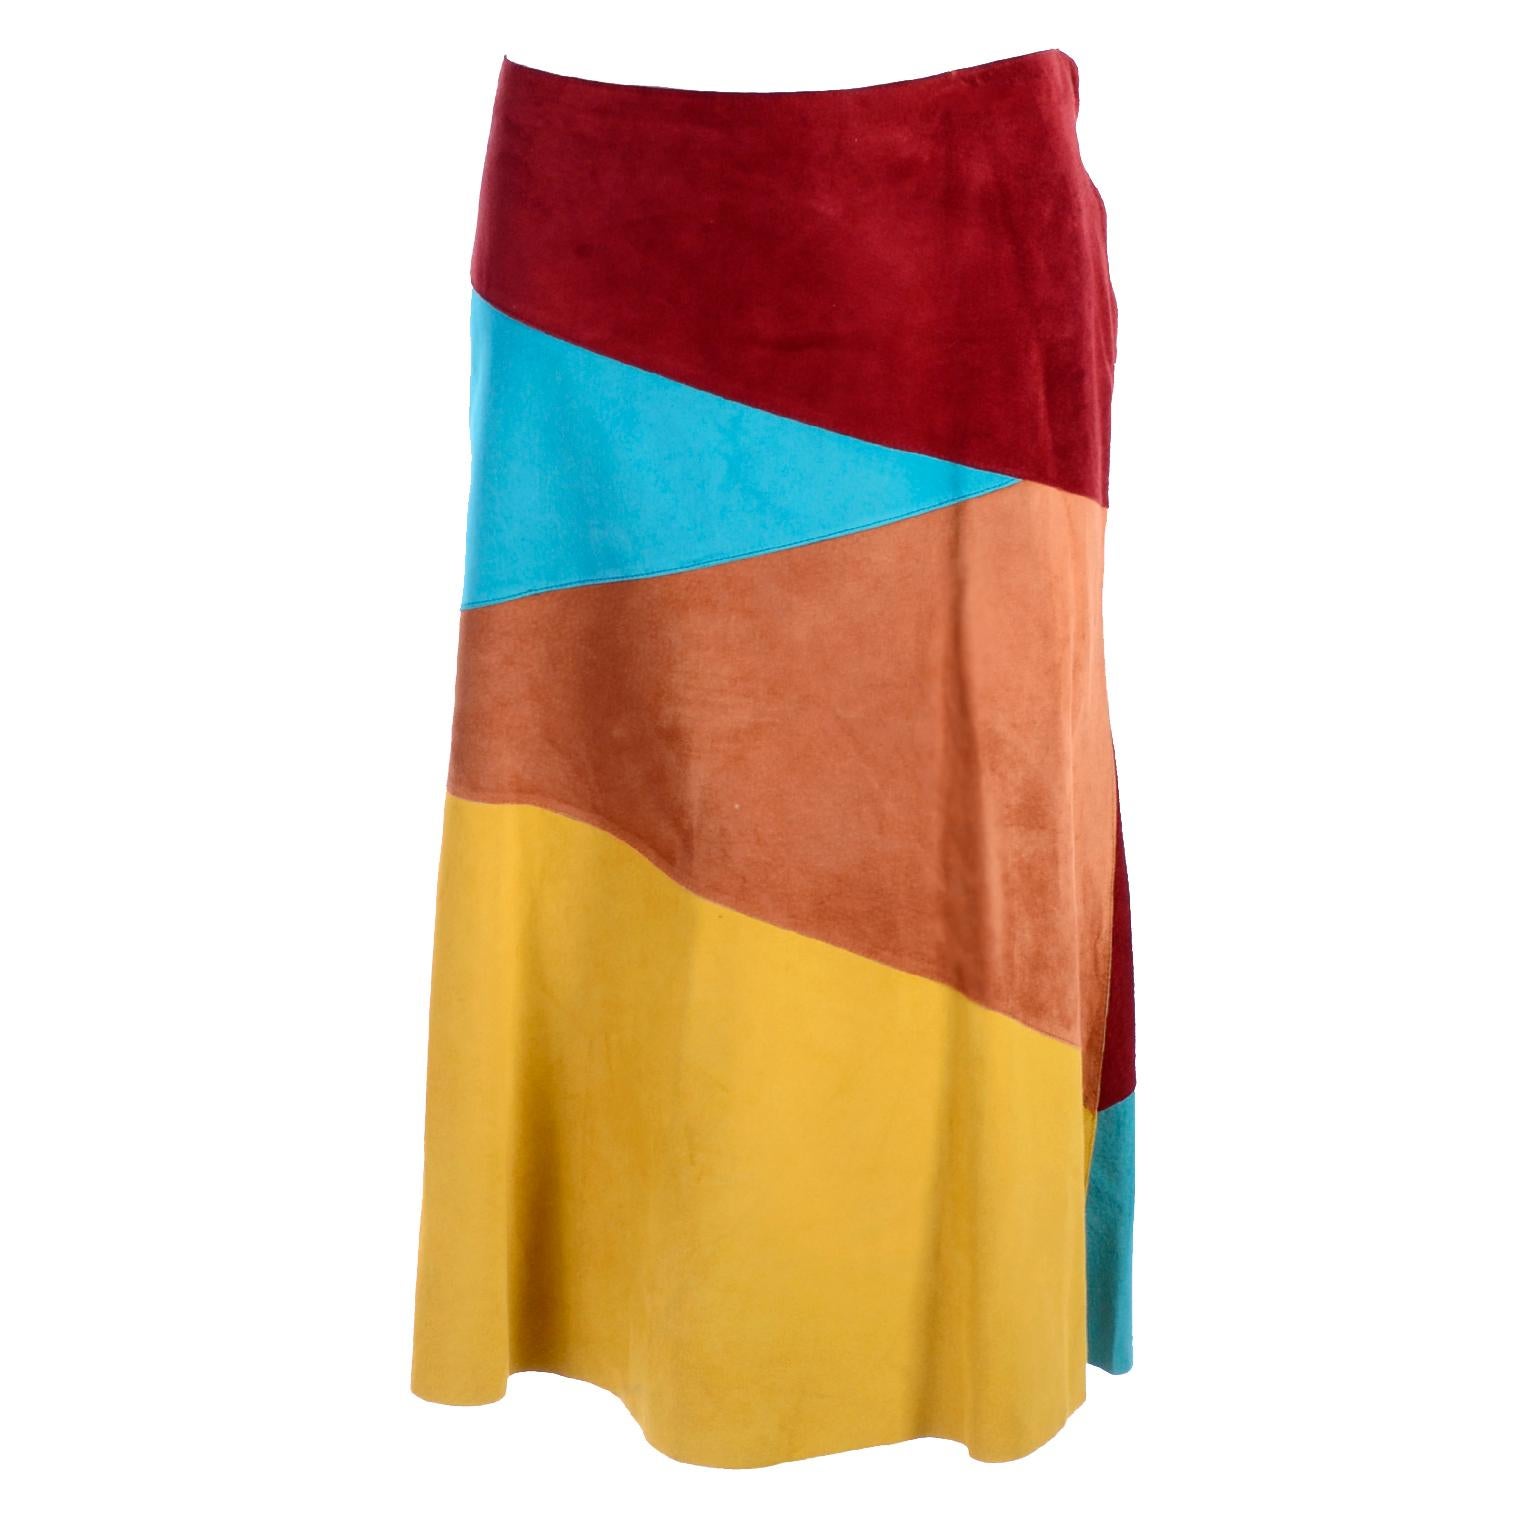 Dolce & Gabbana Color Block Suede Skirt in Burgundy Blue Tan & Yellow